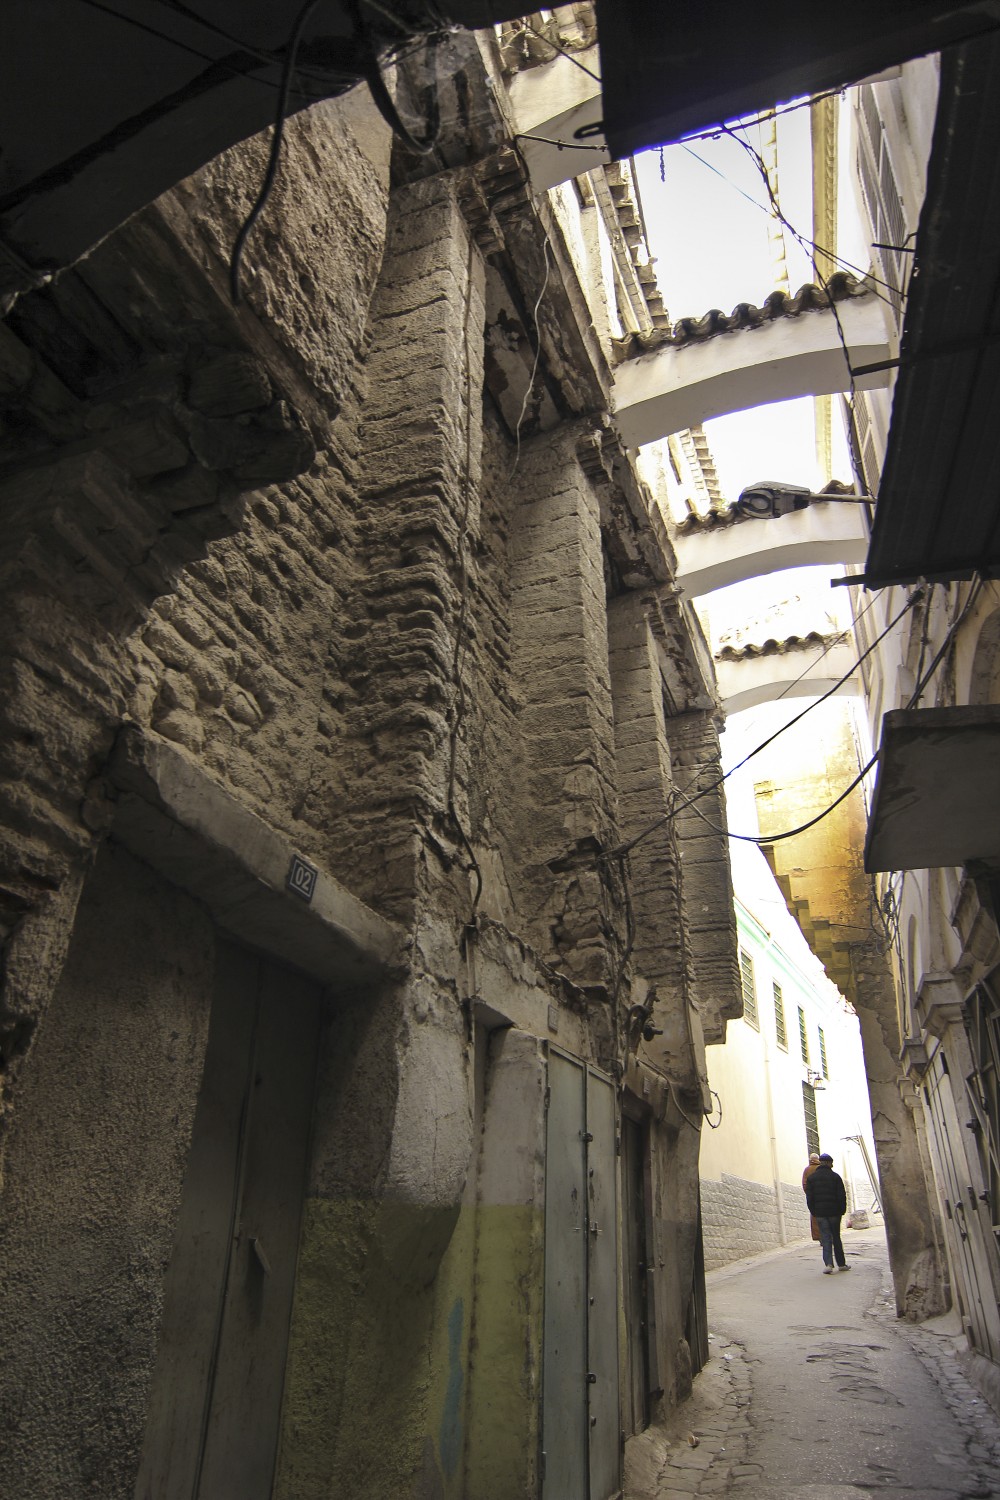 Rue Bey Abdellah, view of arched street with buttresses visible on the left